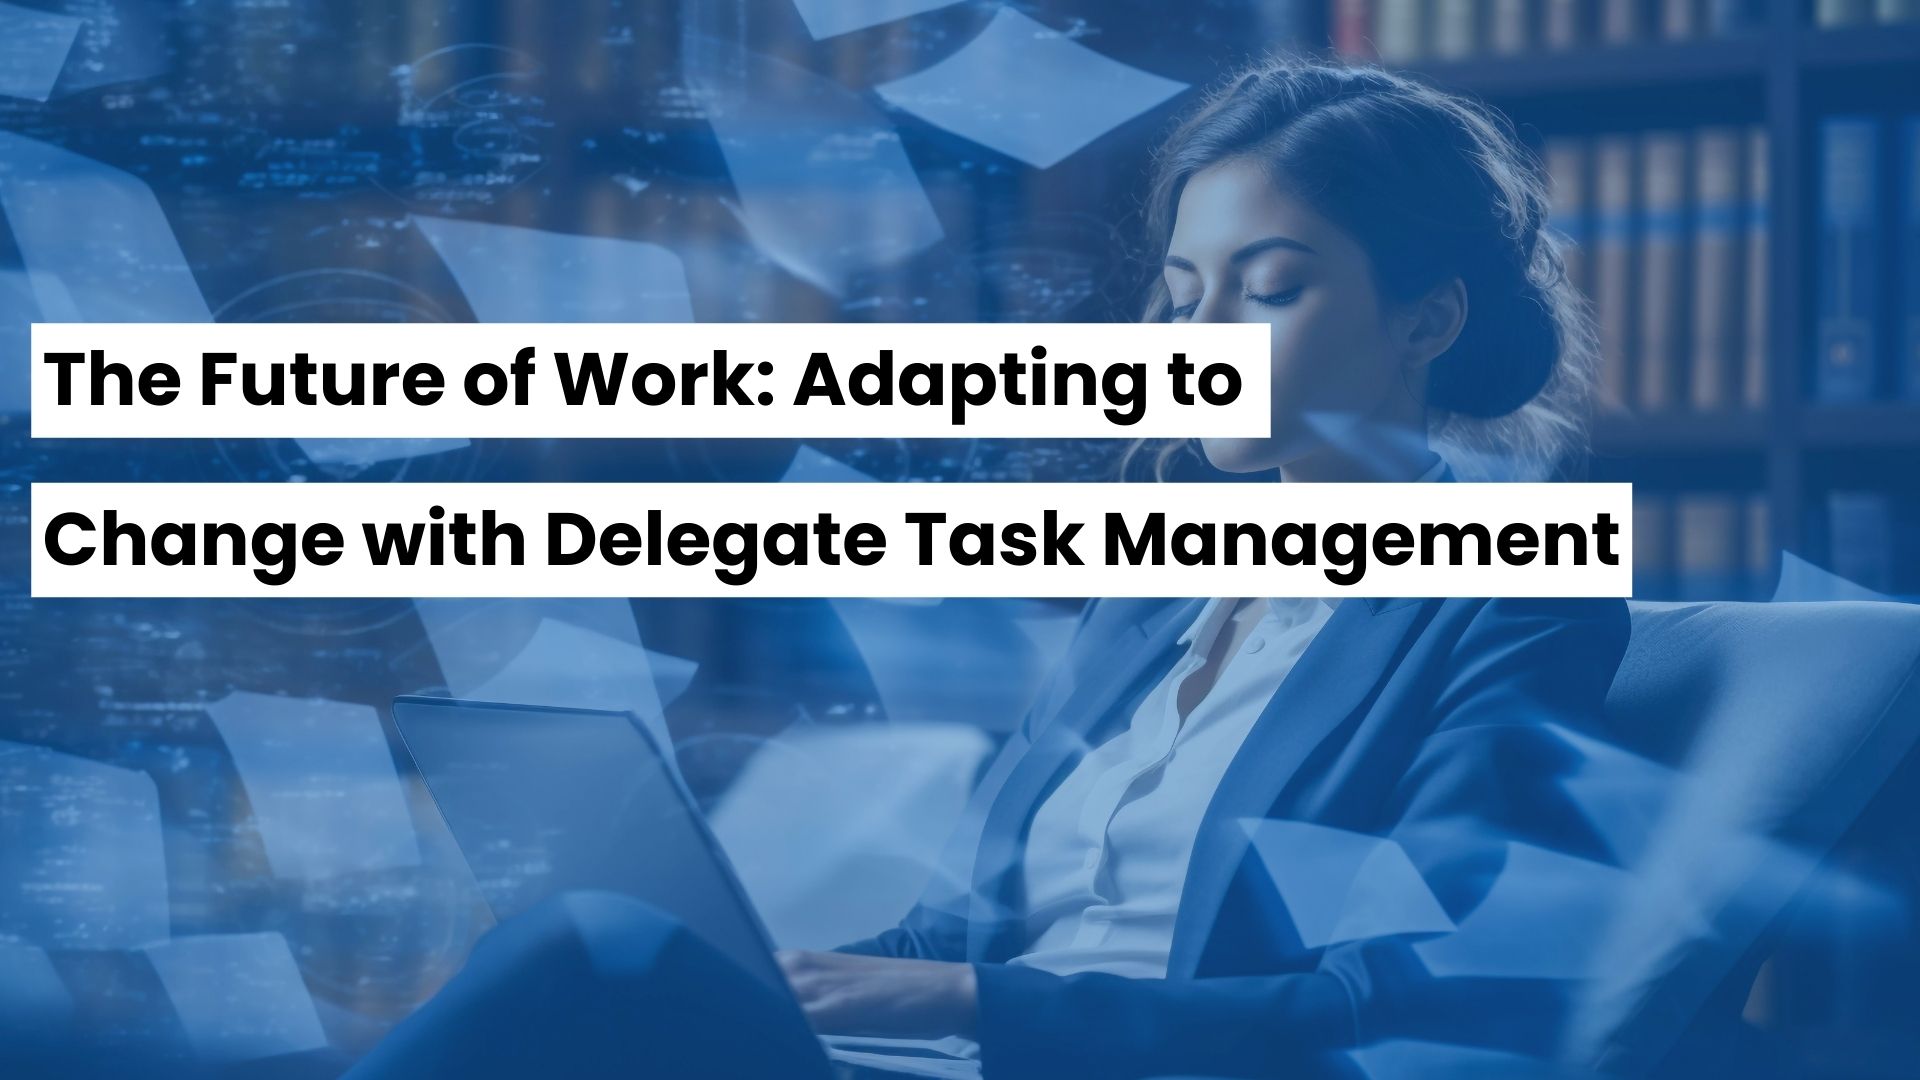 The Future of Work: Adapting to Change with Delegate Task Management